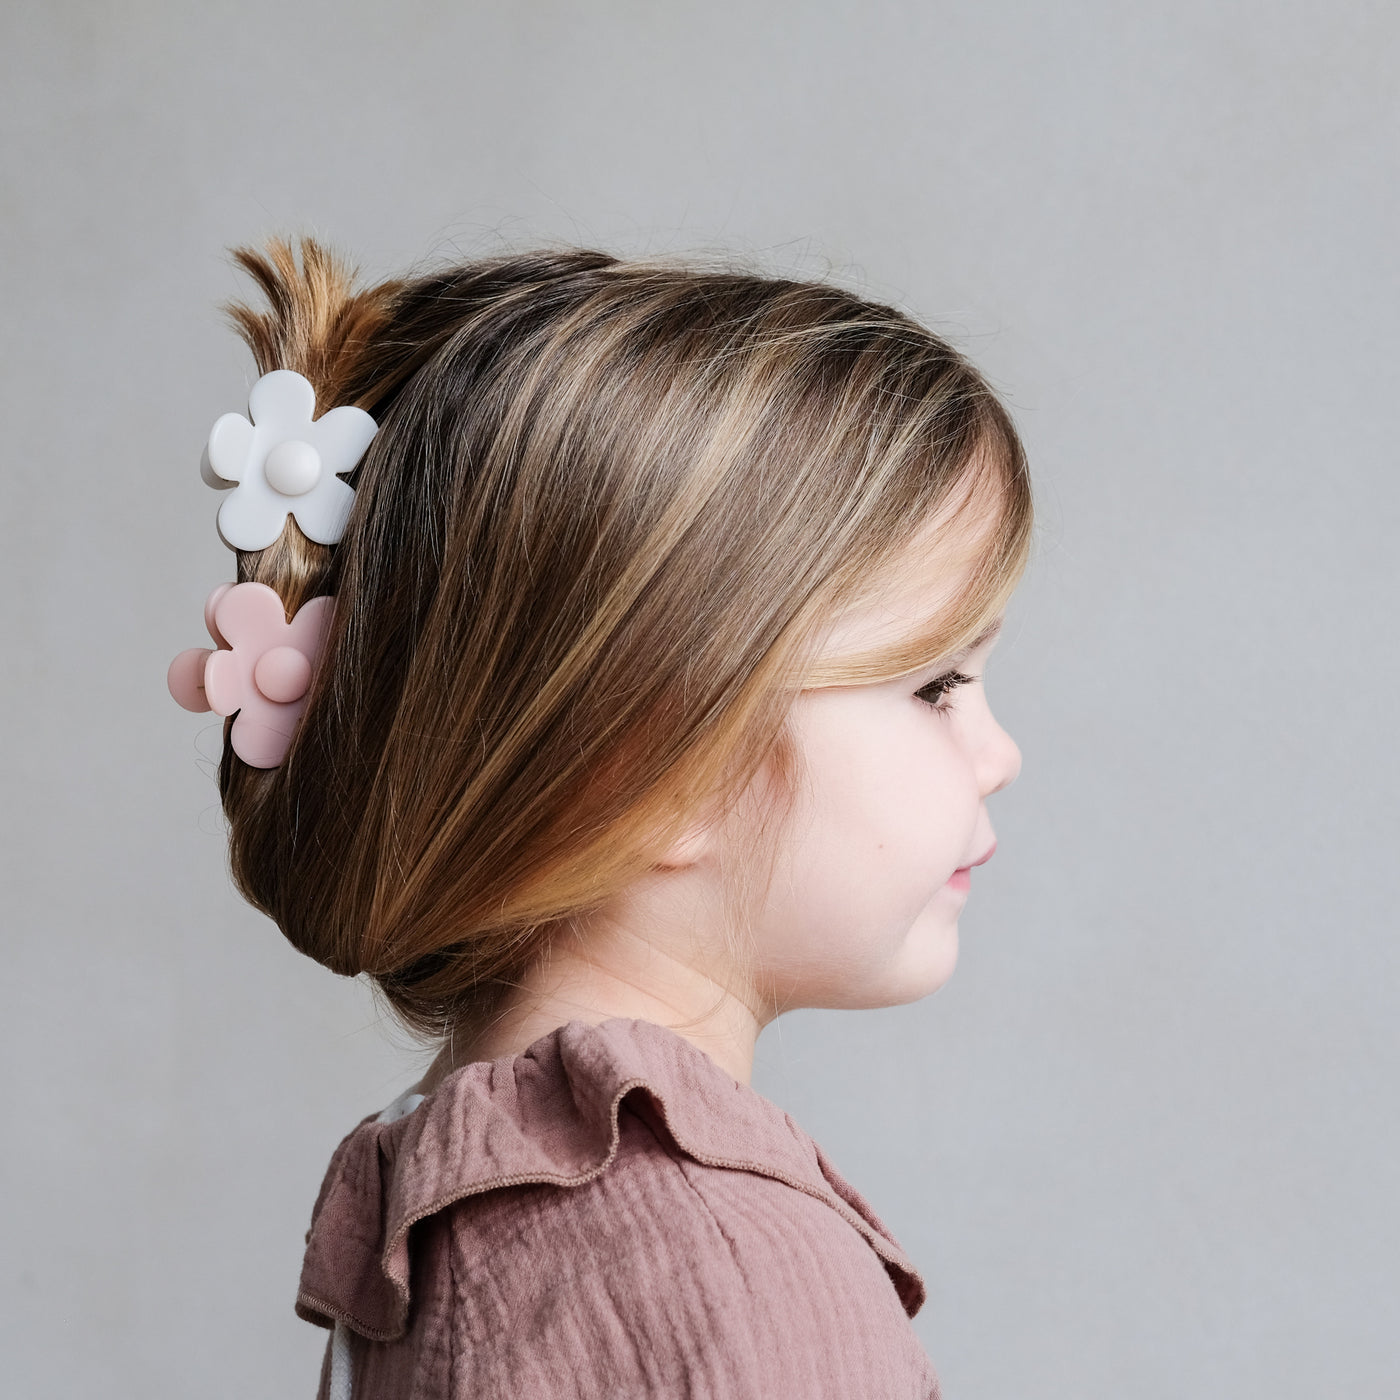 Side profile of little girl with pretty up do hair held together with two daisy shaped bulldog clips